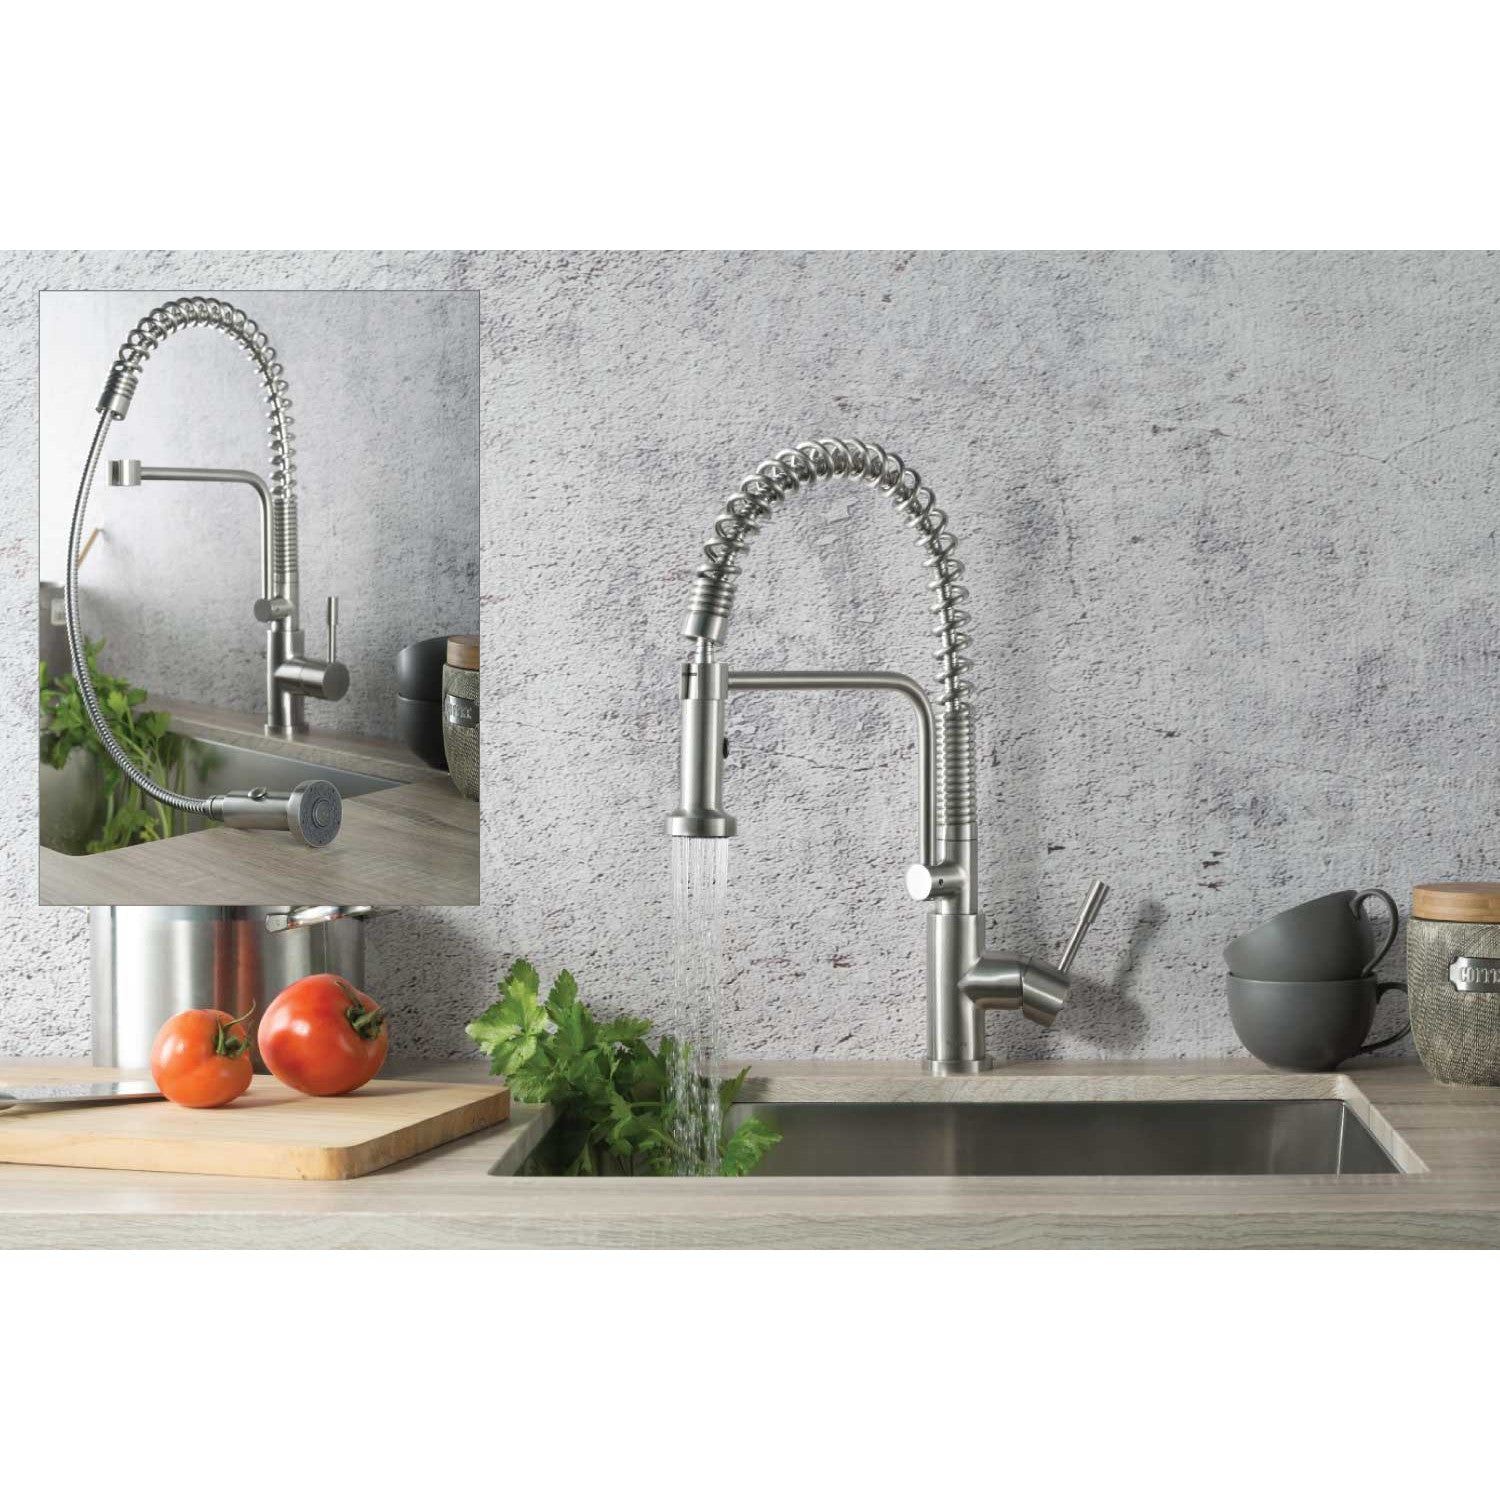 Isenberg Klassiker Caso 19" Single Hole Army Green Semi-Professional Stainless Steel Pull-Down Kitchen Faucet With Dual Function Sprayer